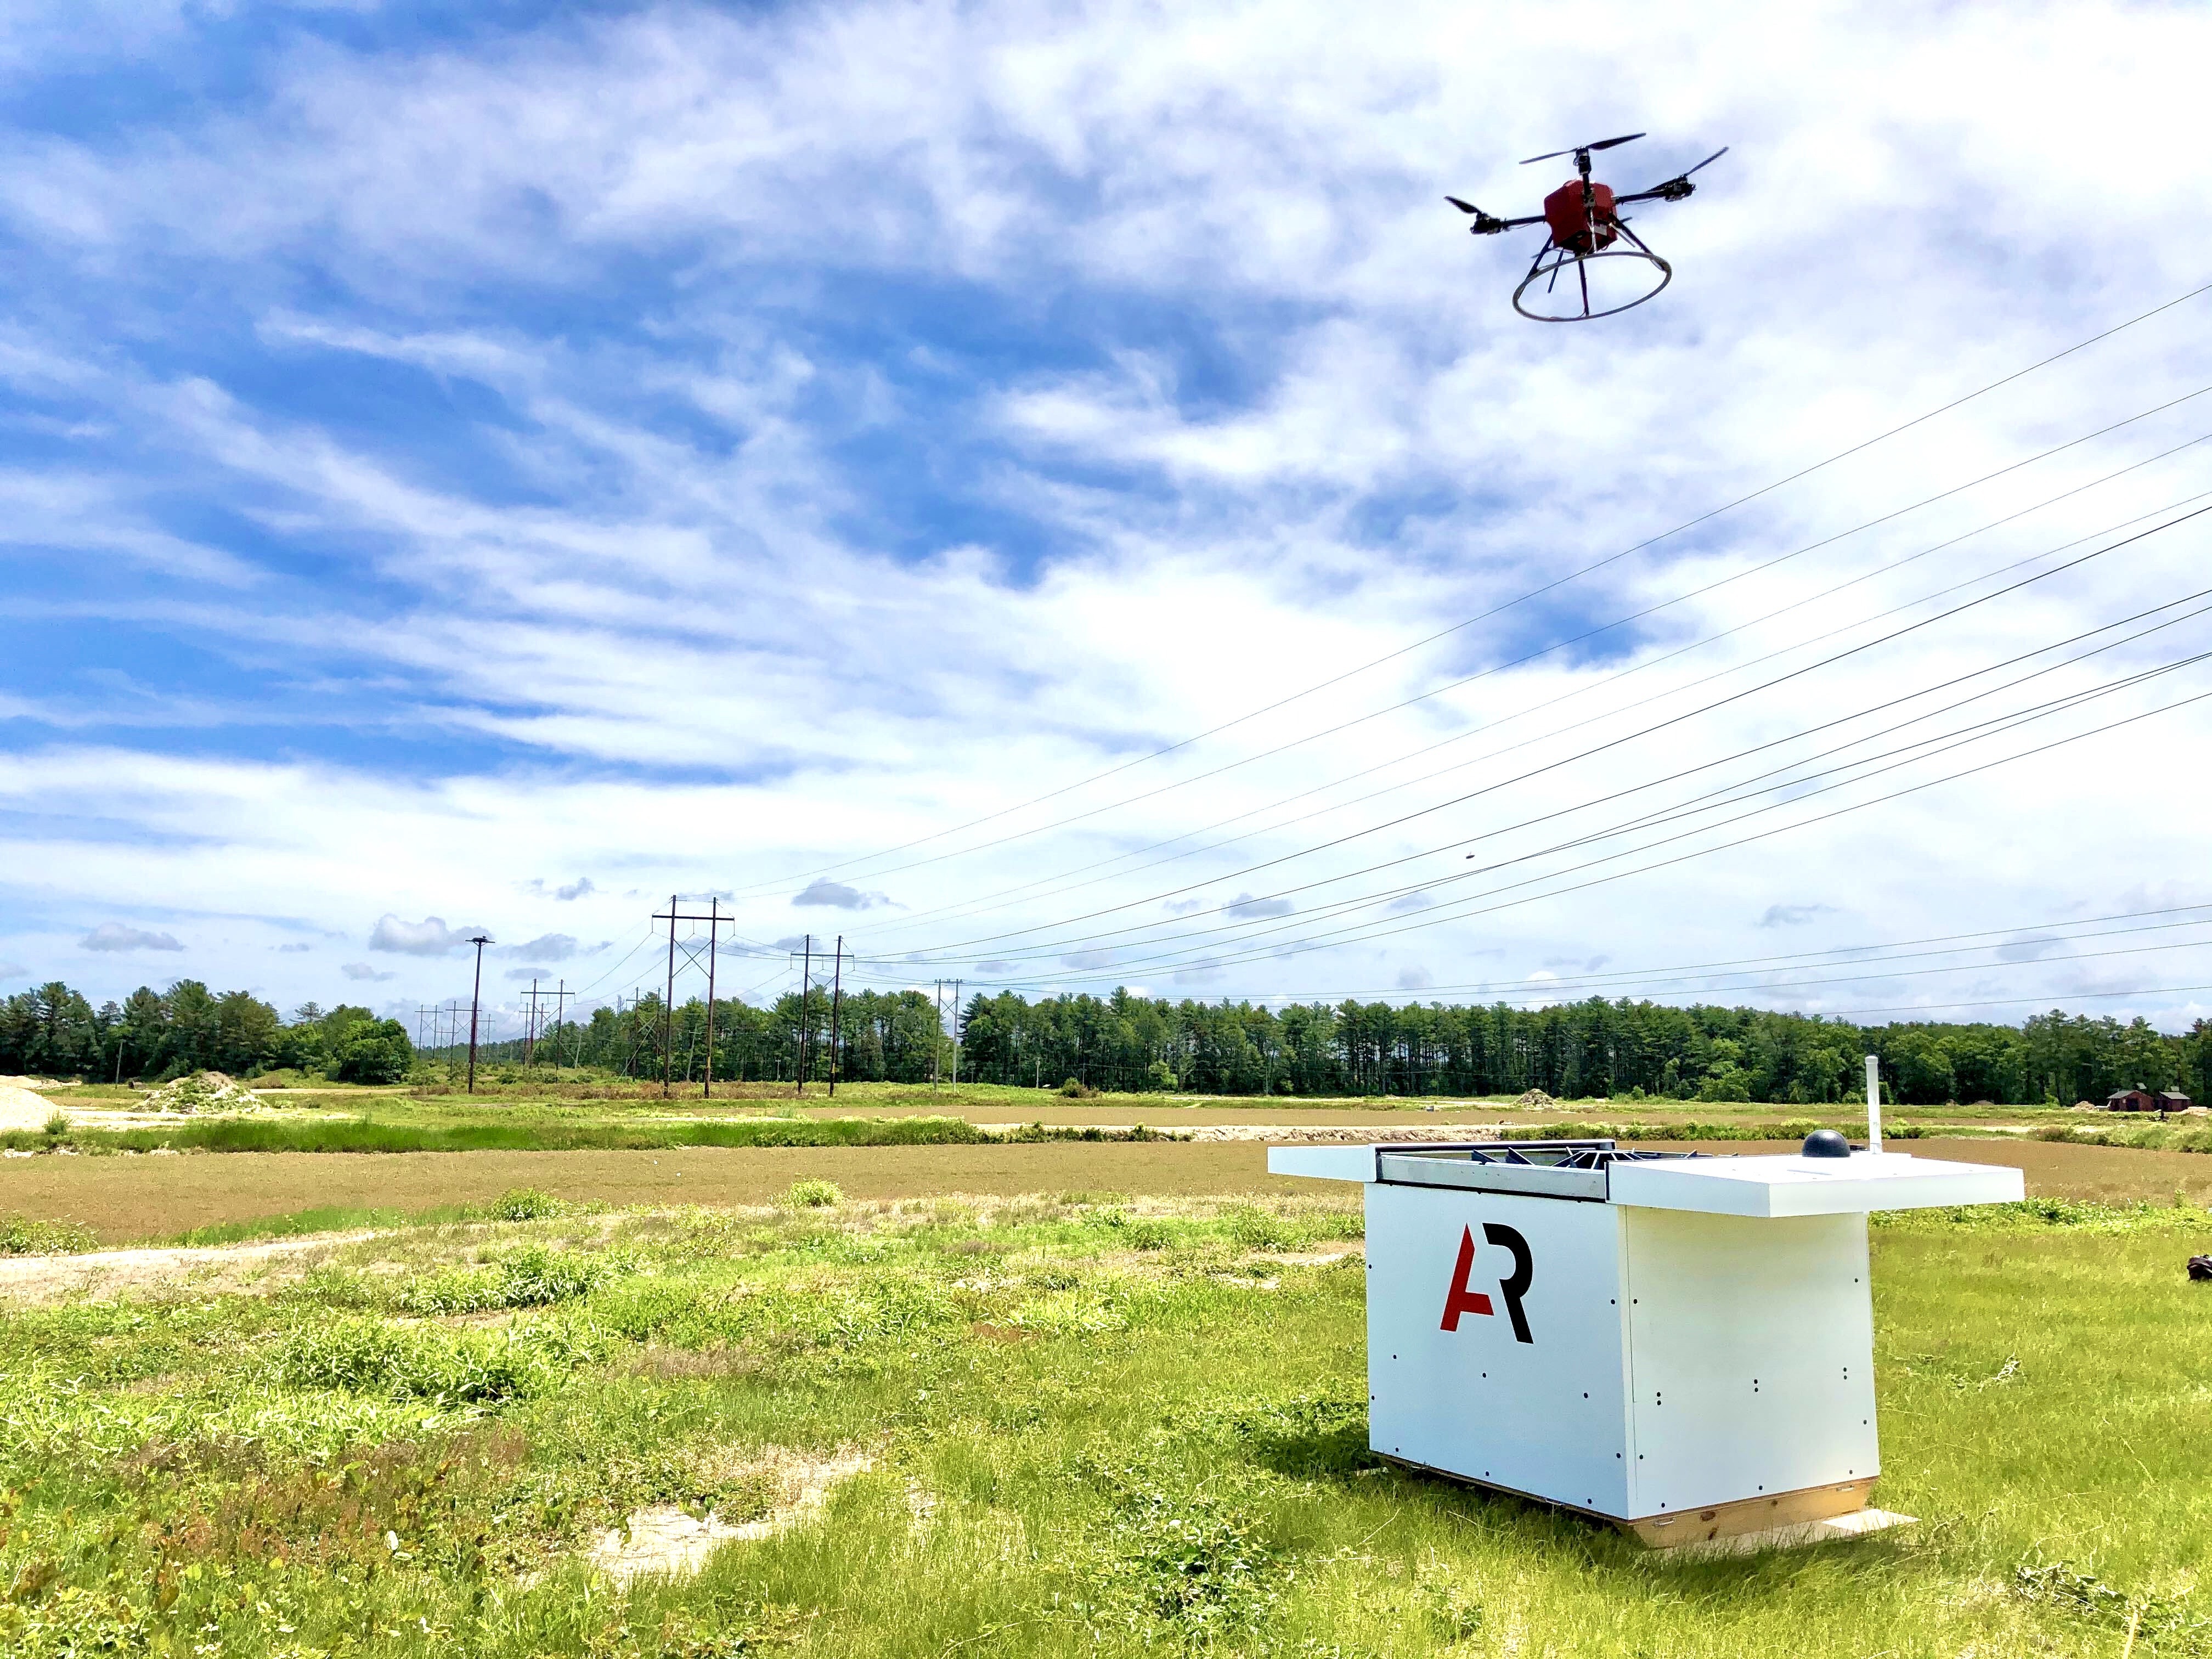 American Robotics First Company Approved by the FAA To Operate Automated Drones Without Human Operators On-Site | Business Wire